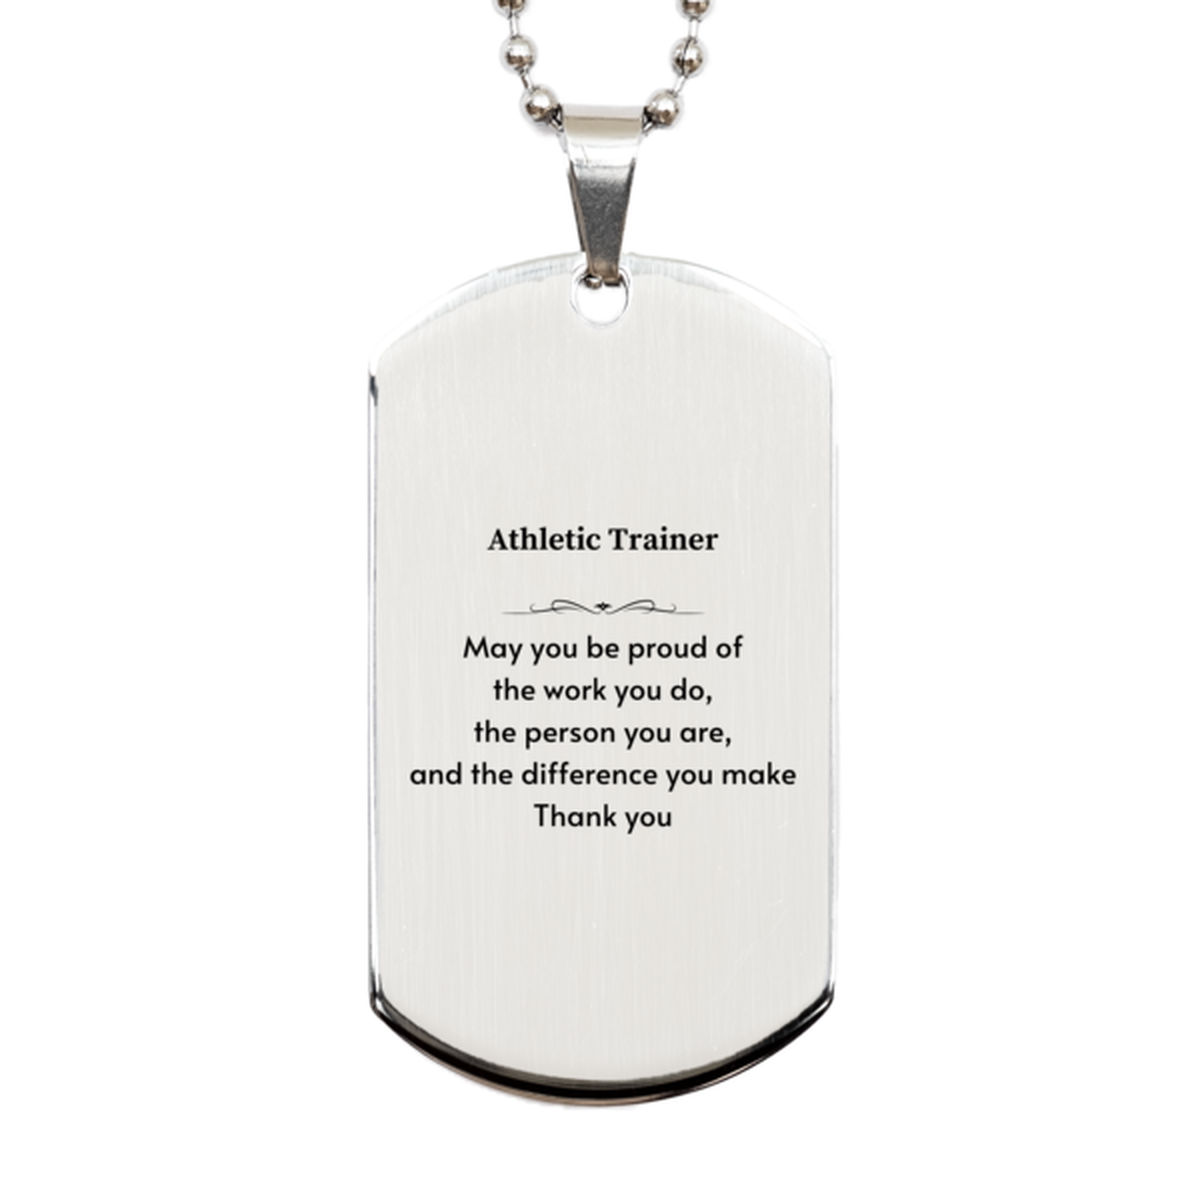 Heartwarming Silver Dog Tag Retirement Coworkers Gifts for Athletic Trainer, Athletic Trainer May You be proud of the work you do, the person you are Gifts for Boss Men Women Friends